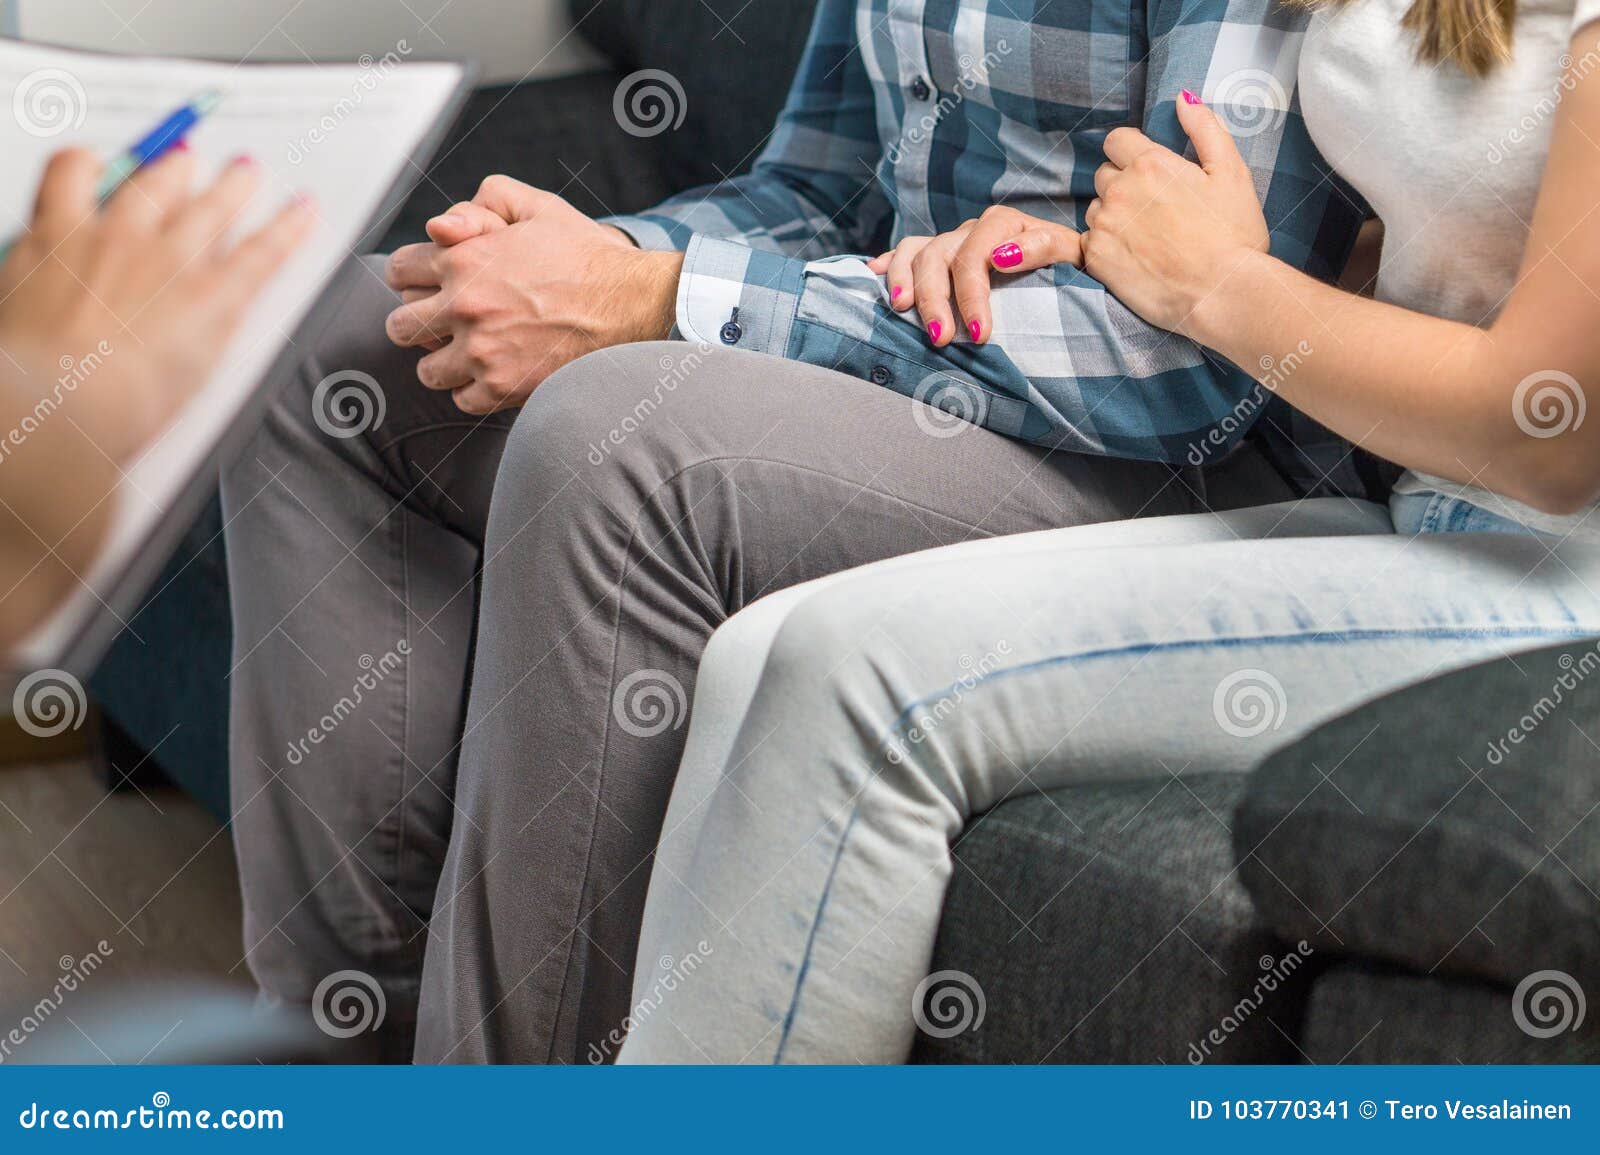 couples therapy or marriage counseling.